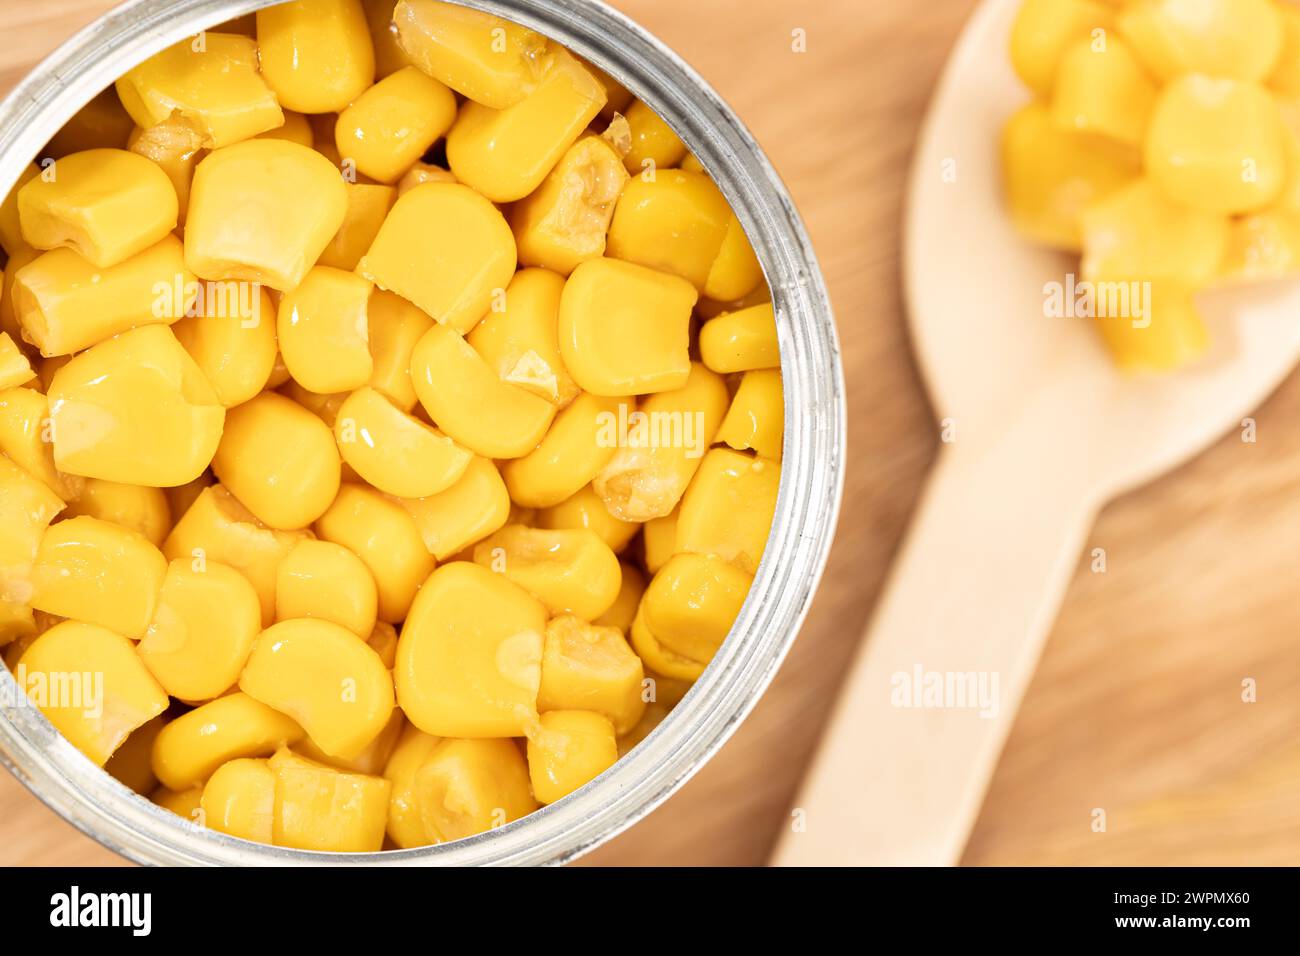 Canned Sweet Corn on wooden table Stock Photo